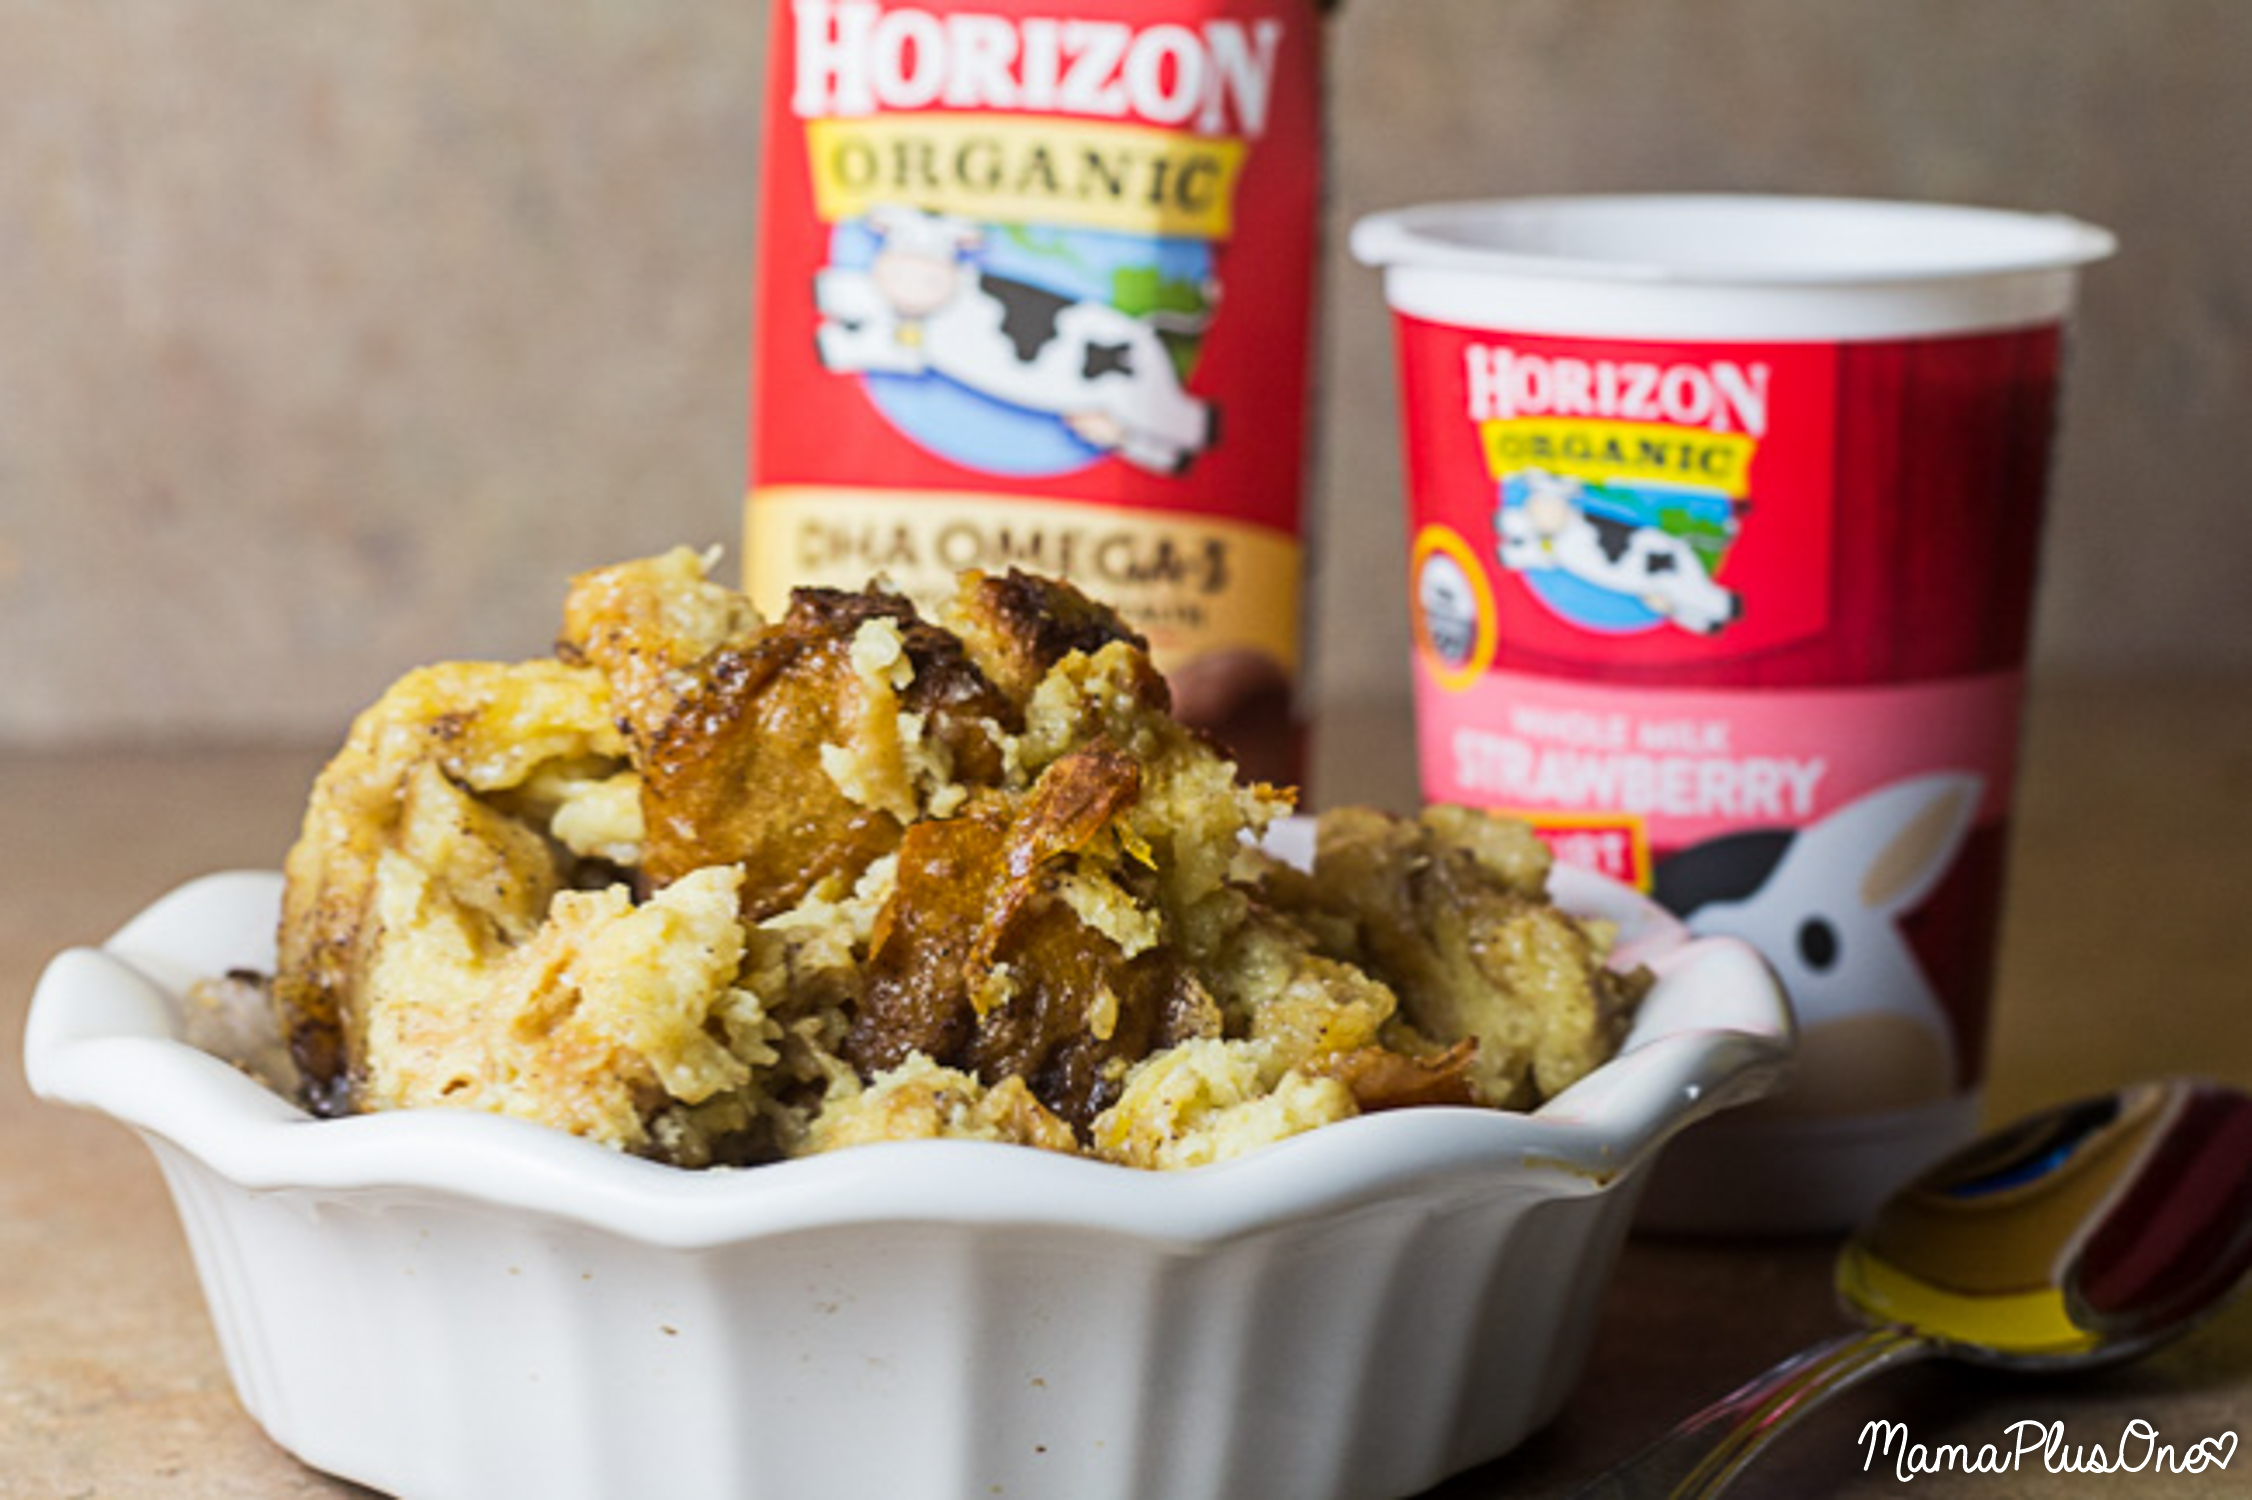 Back to School means getting back in the swing of things. Beat the morning rush with this easy French Toast Casserole! This overnight slow cooker french toast casserole is made in your crock pot so you don't have to worry about scrambling for breakfast the next morning. Plus, it's made with ingredients you can feel good about, like organic peaches or Horizon Organic products (which are also great for tossing in lunchboxes!) #HorizonHappiness [ad]